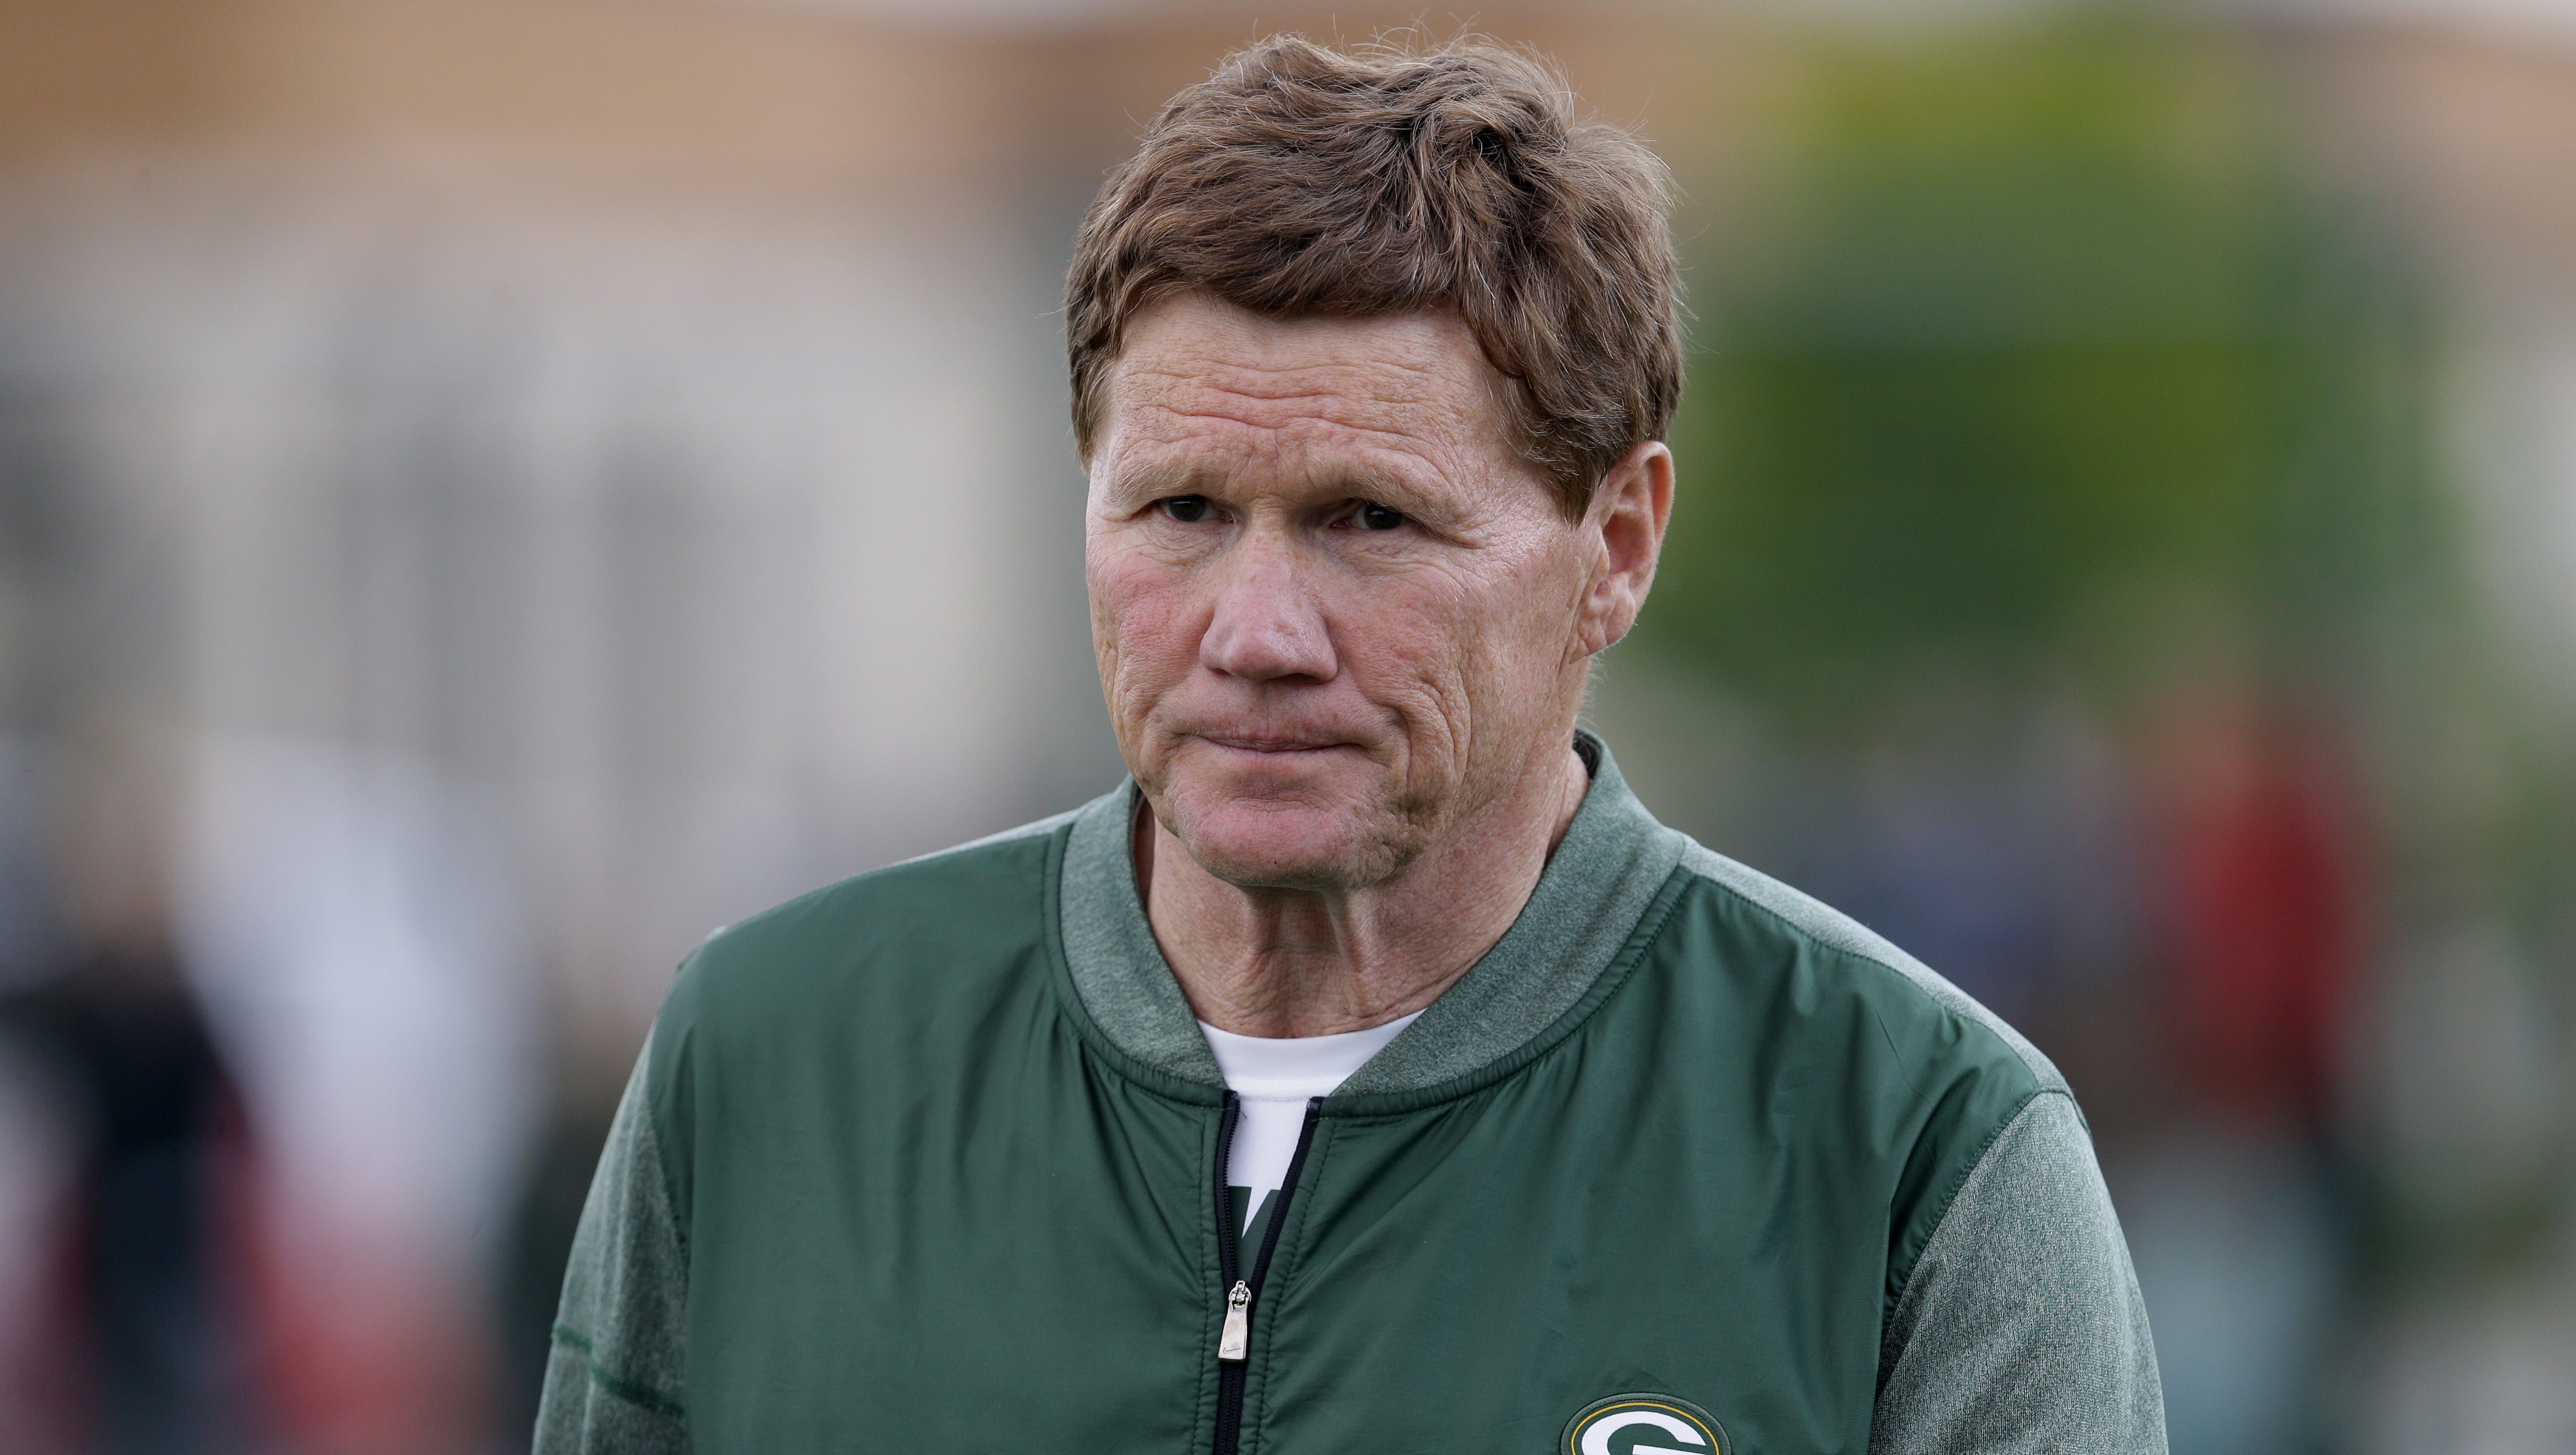 Green Bay Packers president Mark Murphy is shown during training camp Friday, August 4, 2017 in Green Bay, Wis.